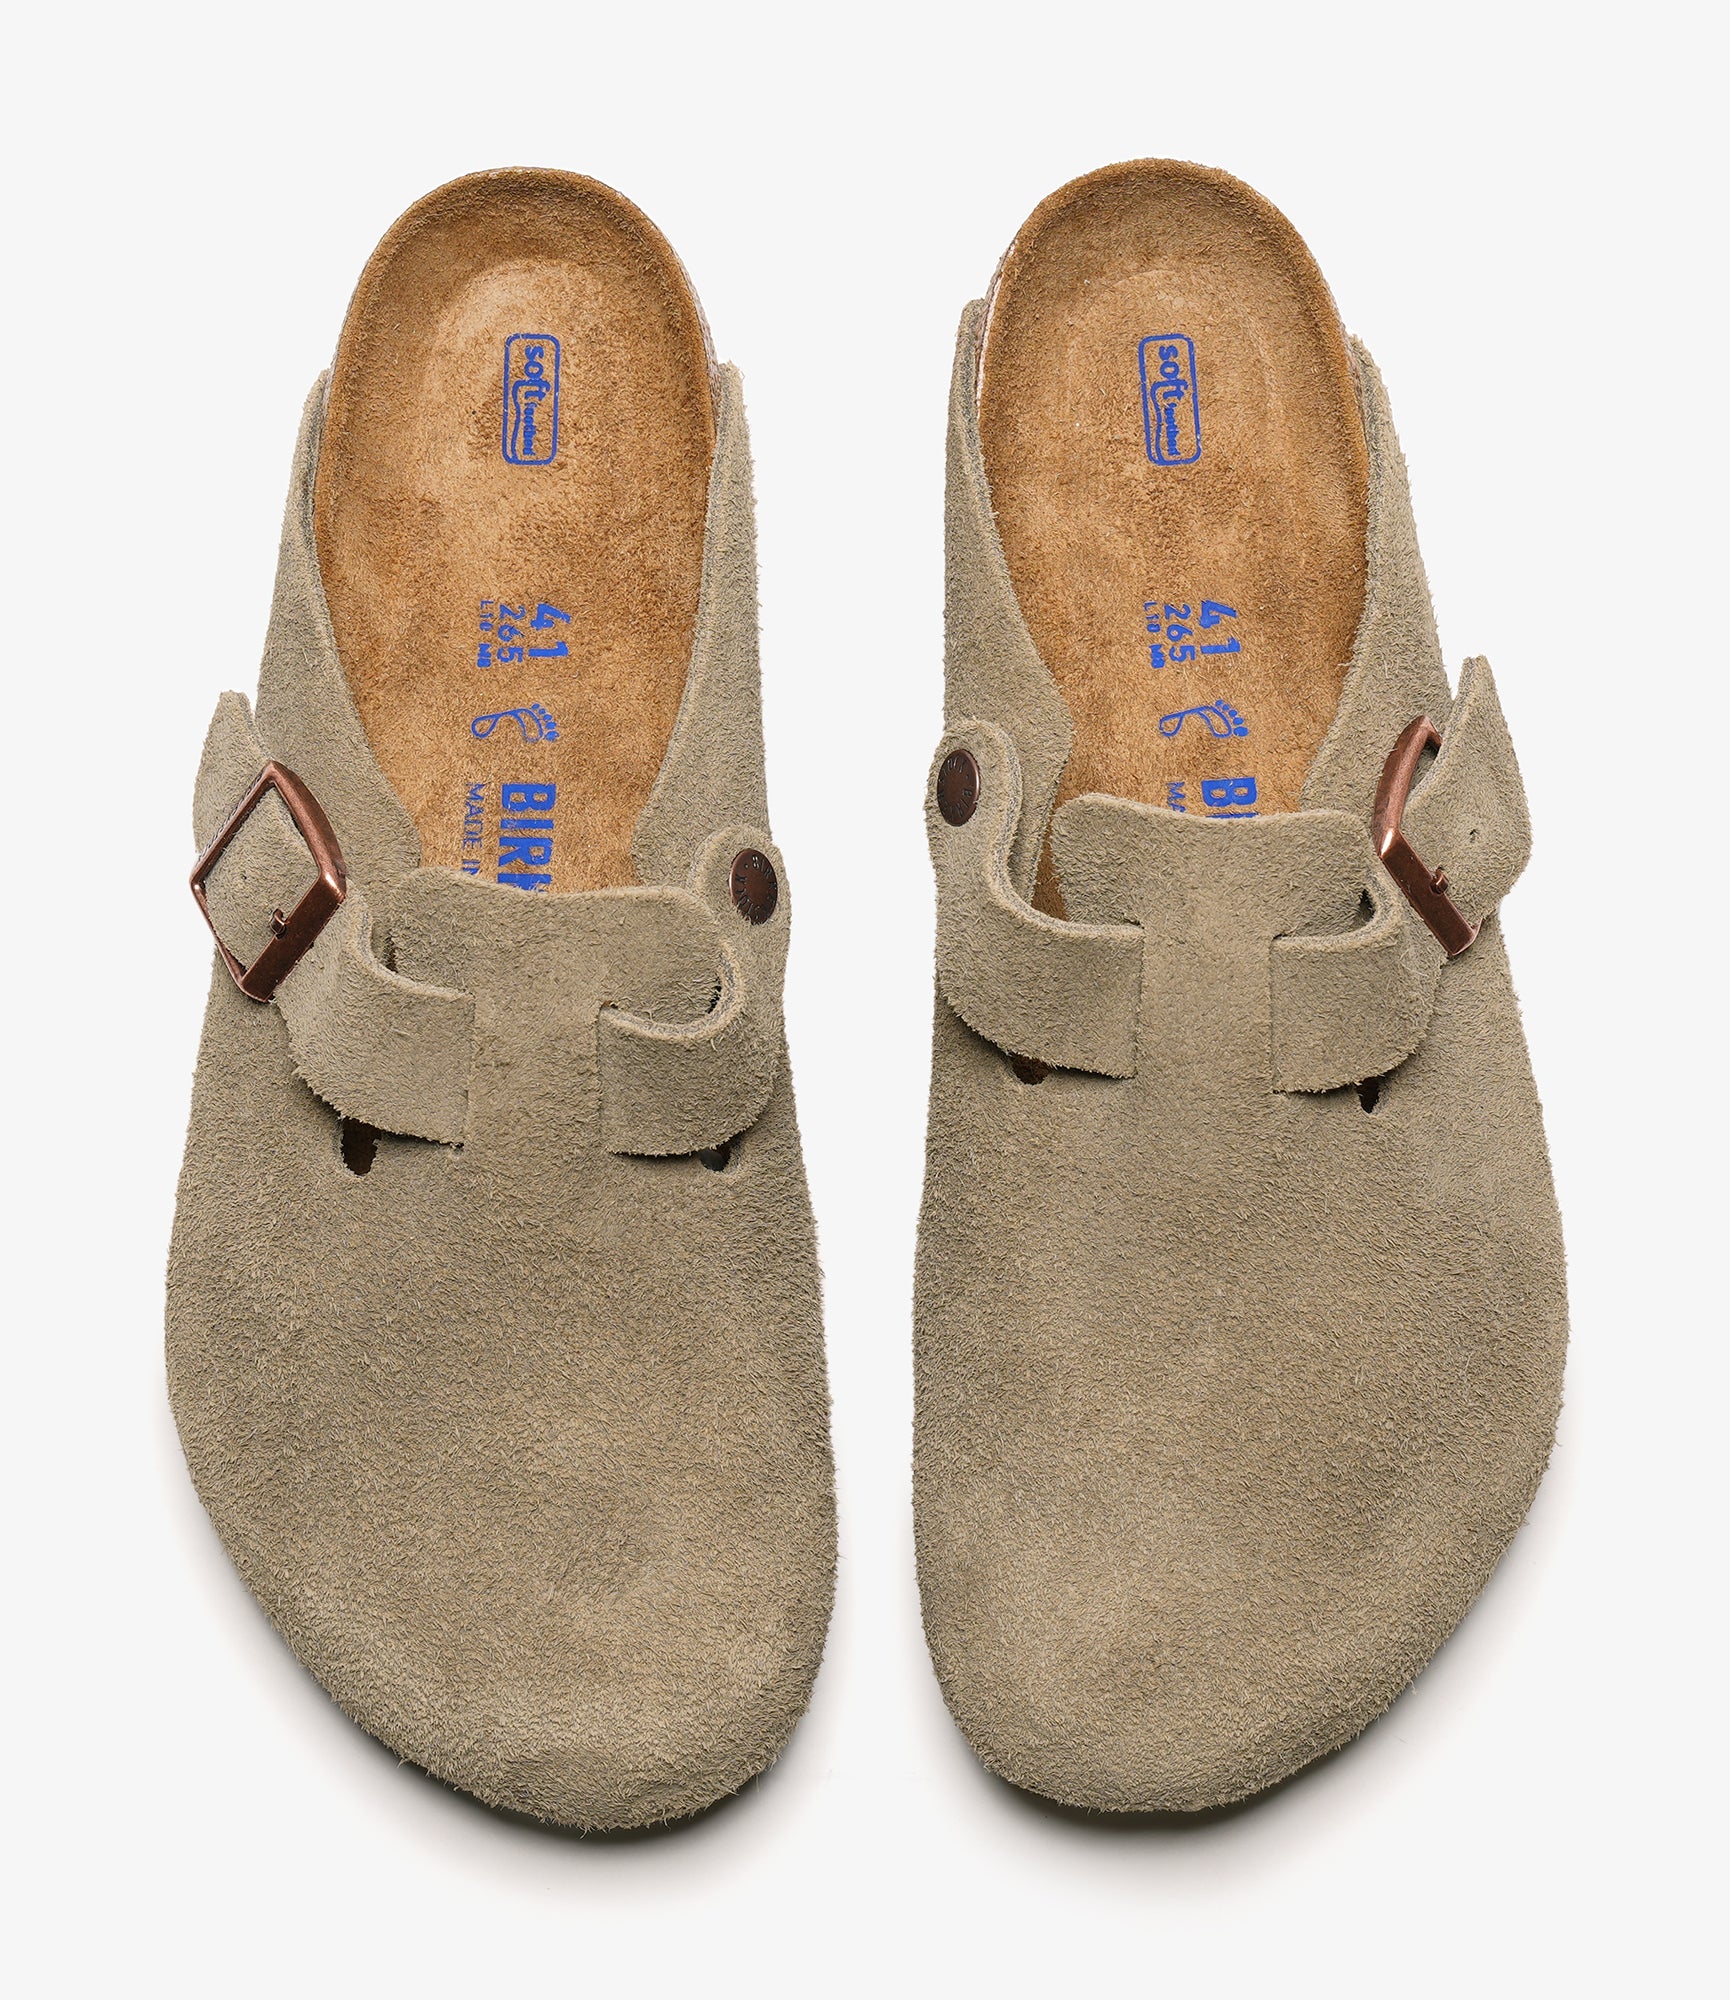 Boston - Taupe Suede - Soft Footbed